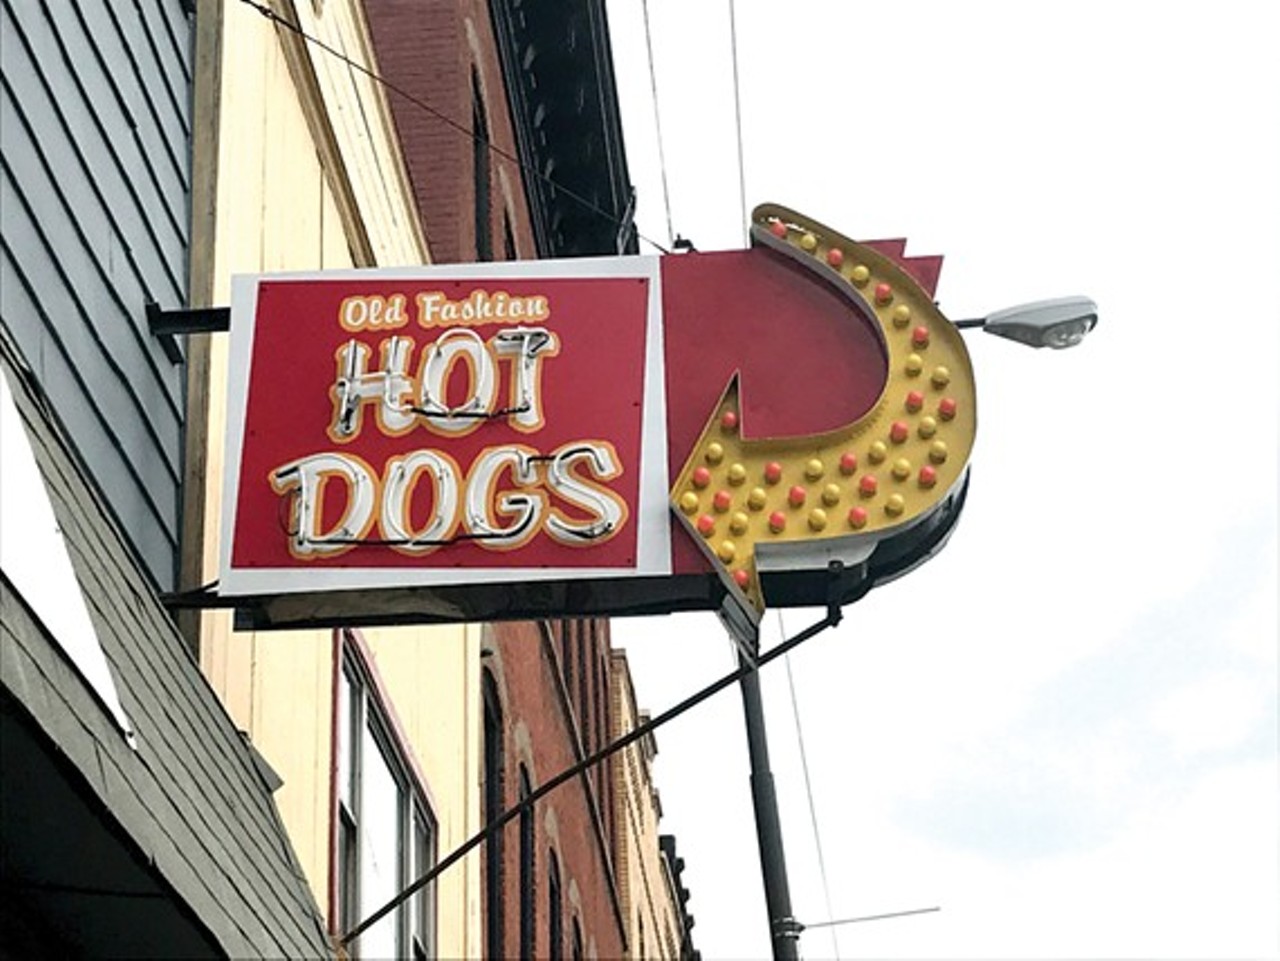  Old Fashion Hot Dog (Inn)
4008 Lorain Ave., 216-631-4460
This beloved hot dog joint has been in business for 90 years. Try their time-tested chili cheese dogs and make sure to snap a pic of their mid-century neon sign just above their front door.
Photo by Billy Hallal